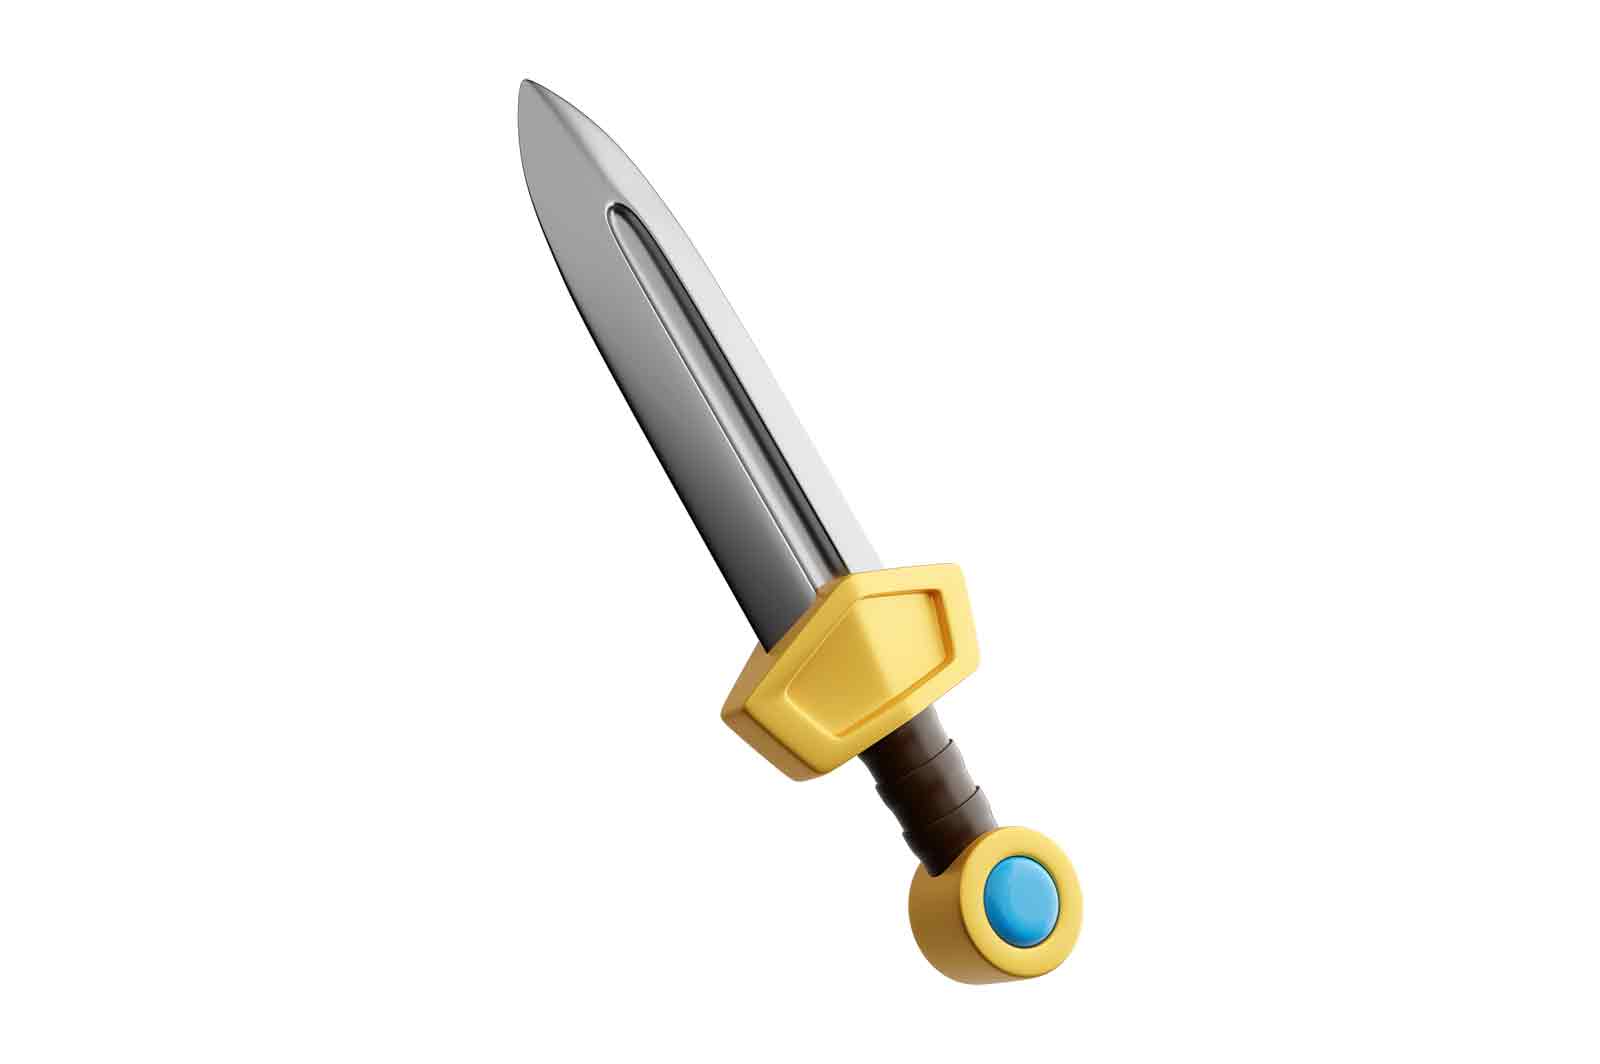 Sword with silver blade and golden hilt, 3d rendered illustration. Symbol of medieval warfare, fantasy adventure, or heroic quest.